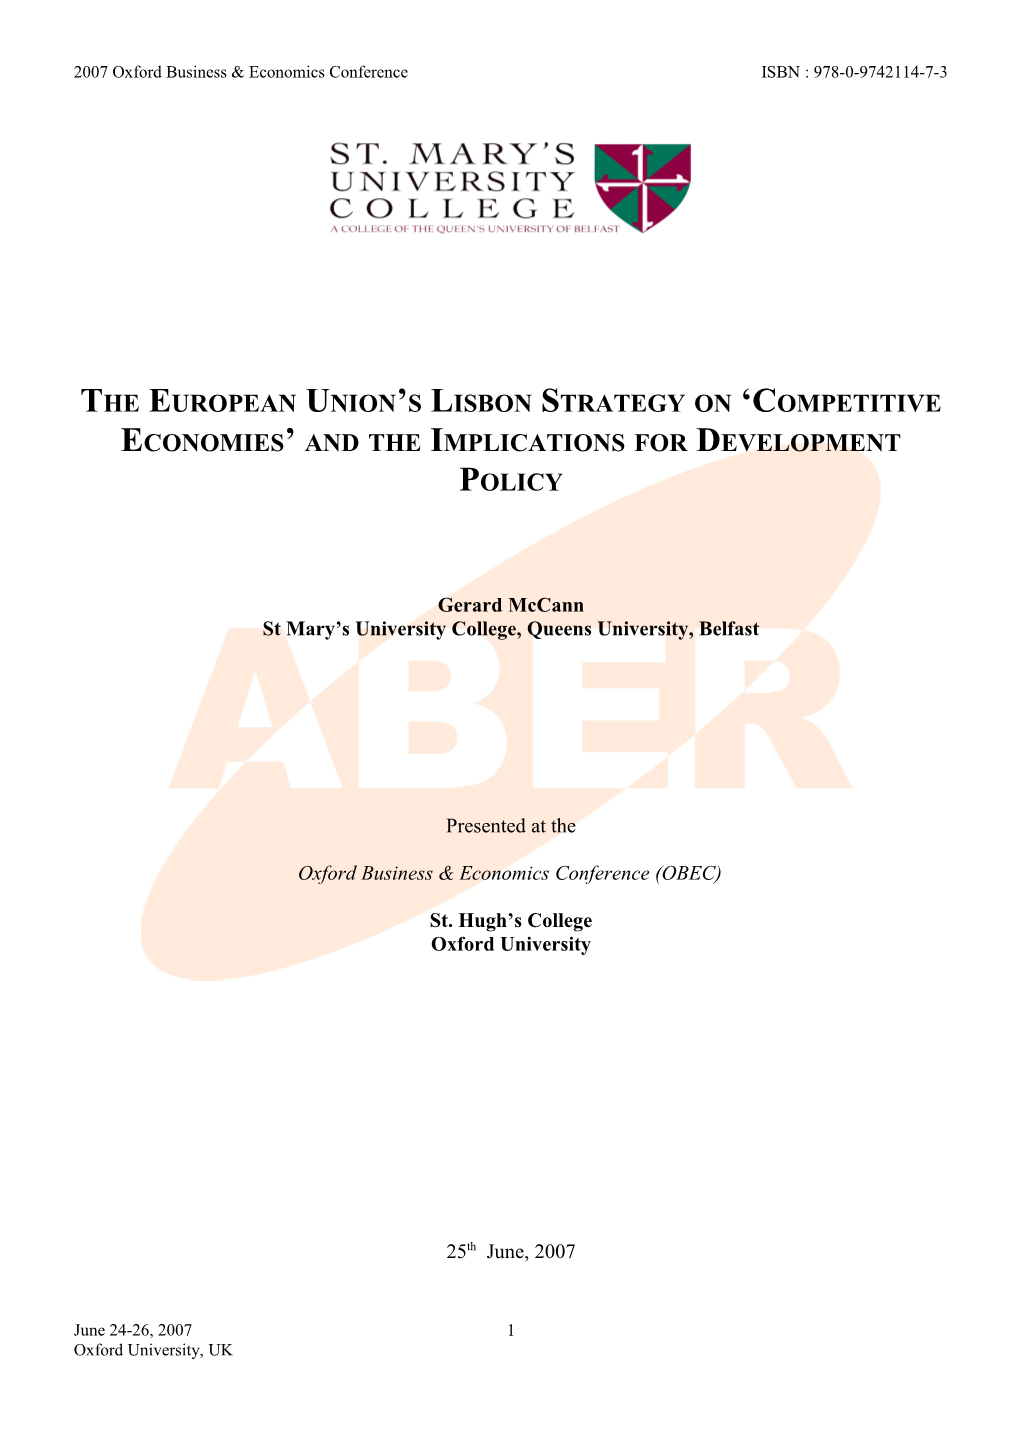 The EU S Lisbon Strategy on Competitive Economies and Its Implications for the Cotonou